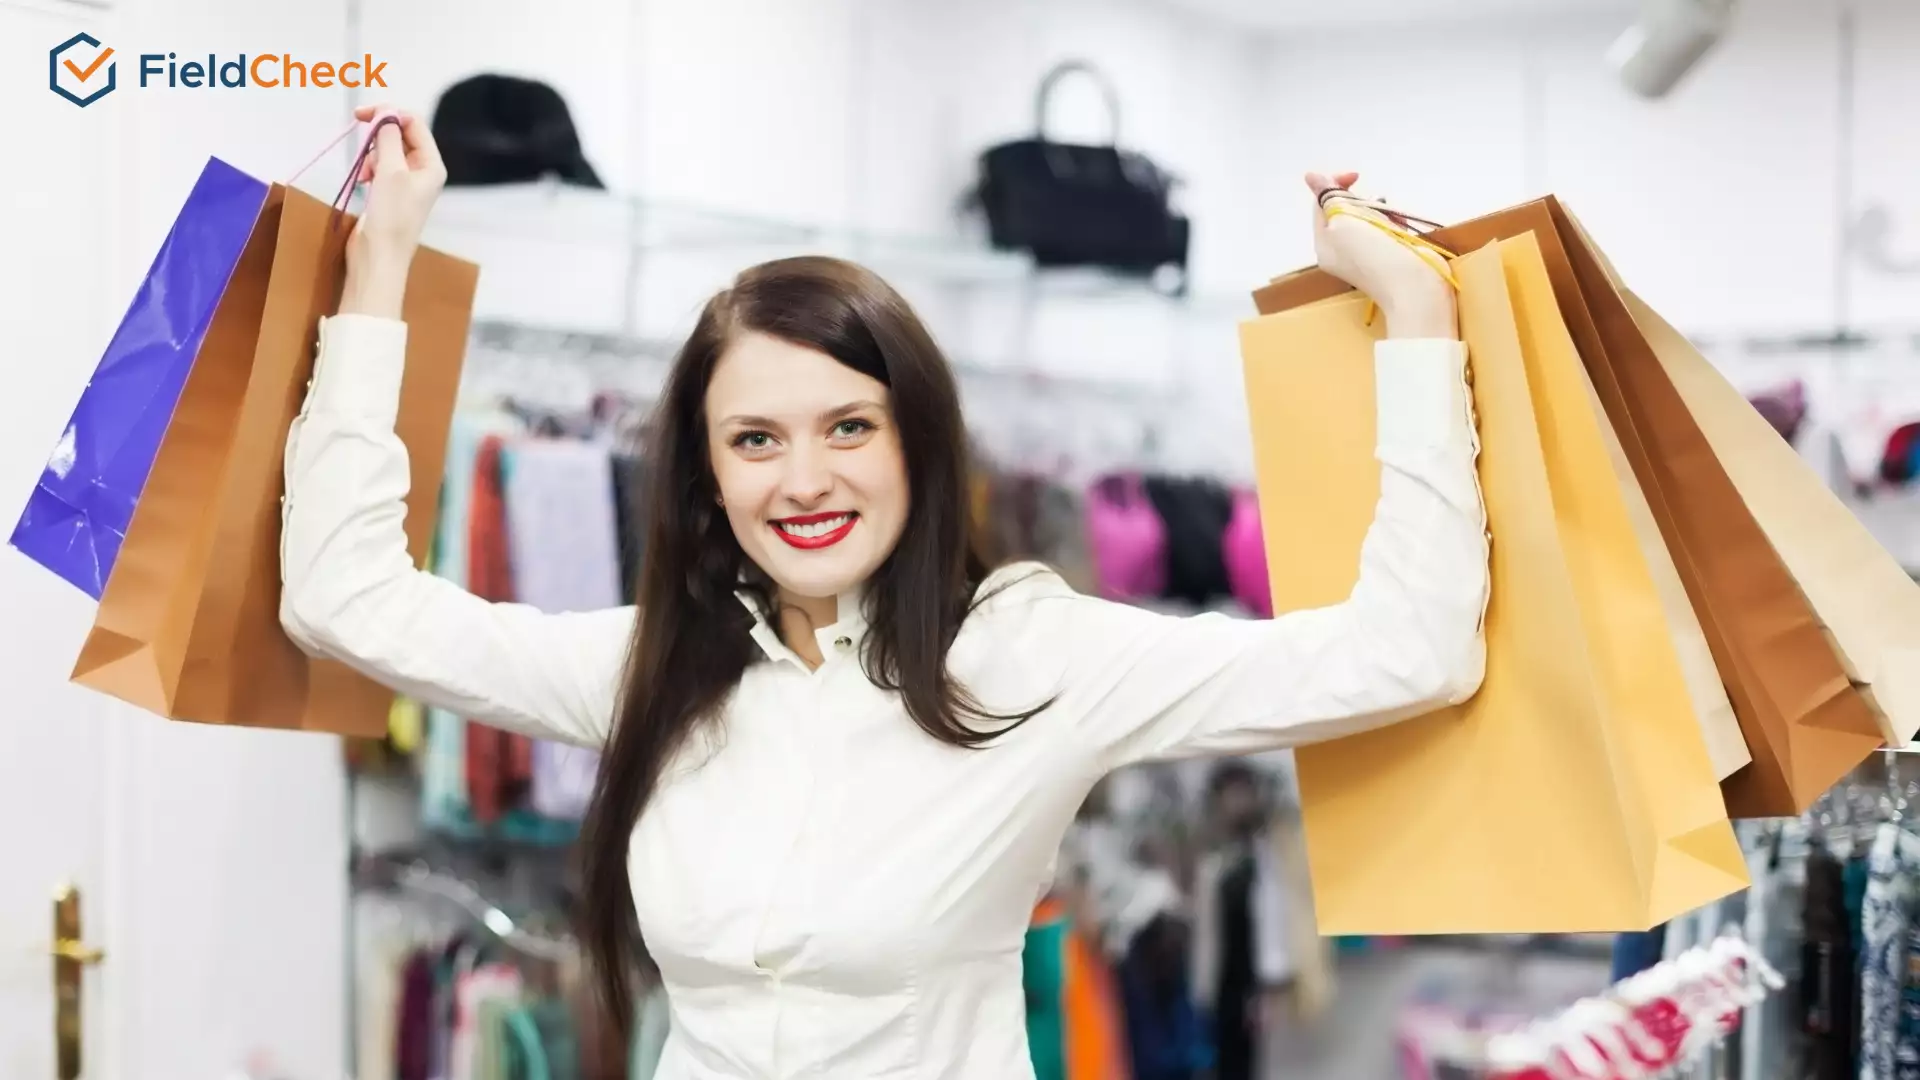 Visual Merchandising Management - Tips For Attracting Customers For Businesses